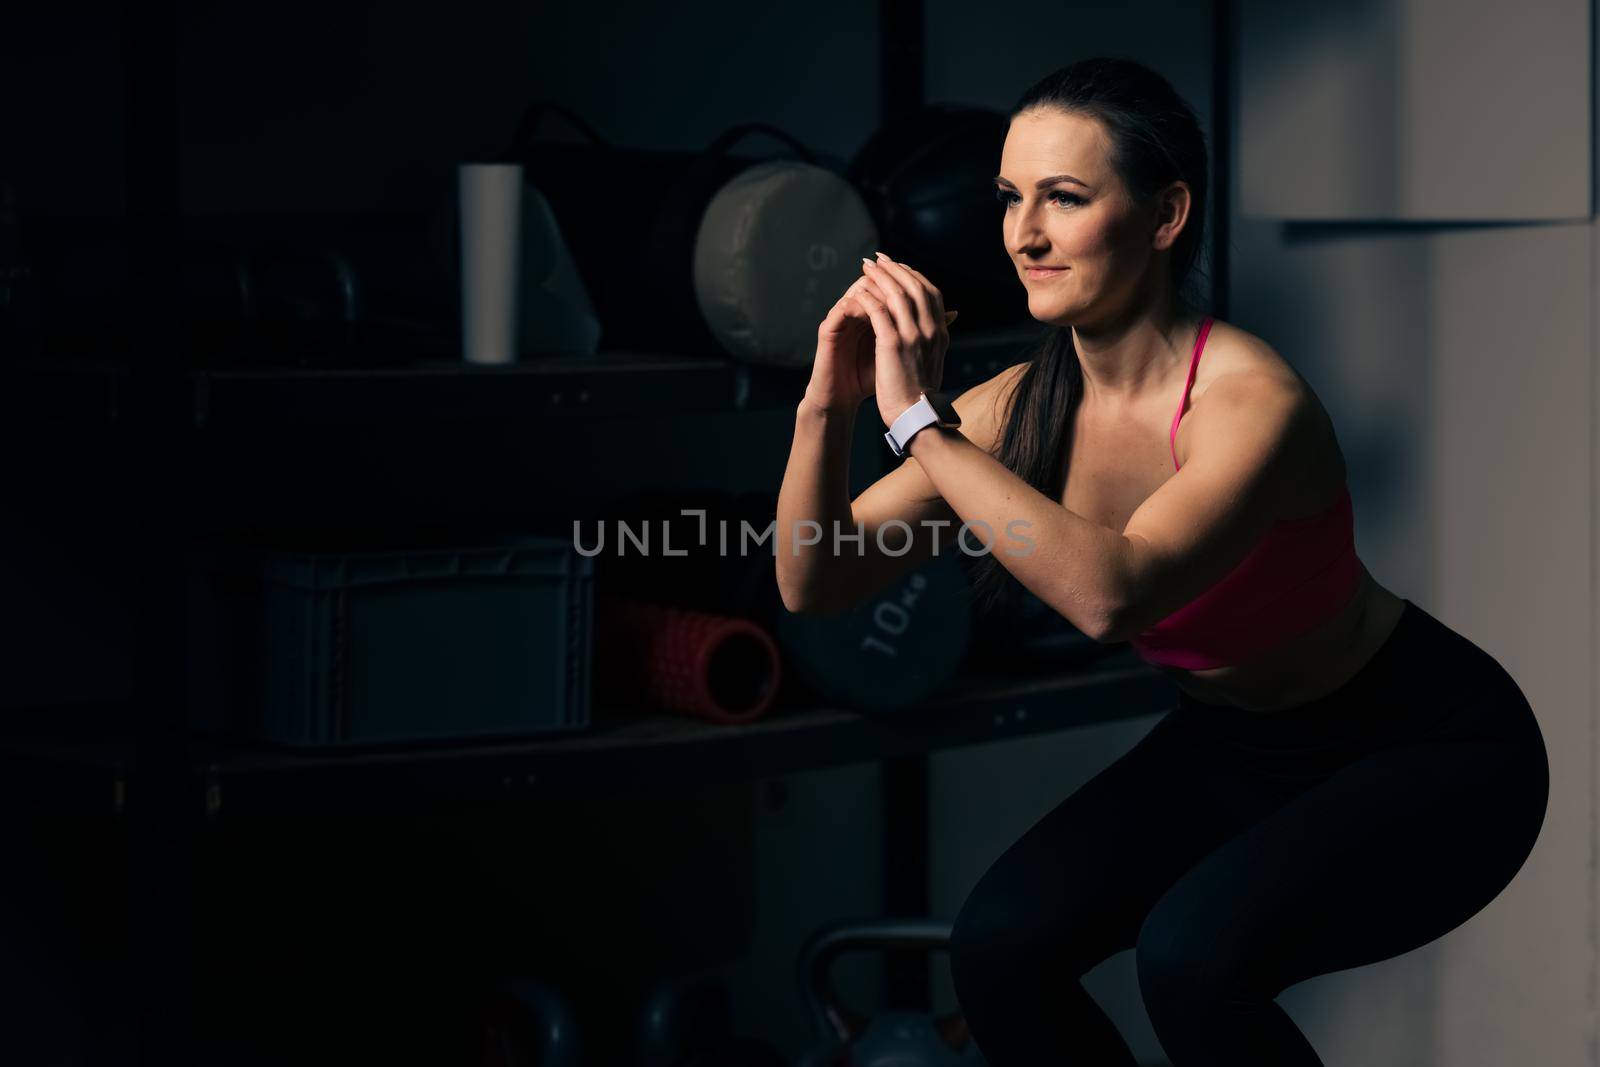 squat on a balance pad during fitness exercises by Edophoto